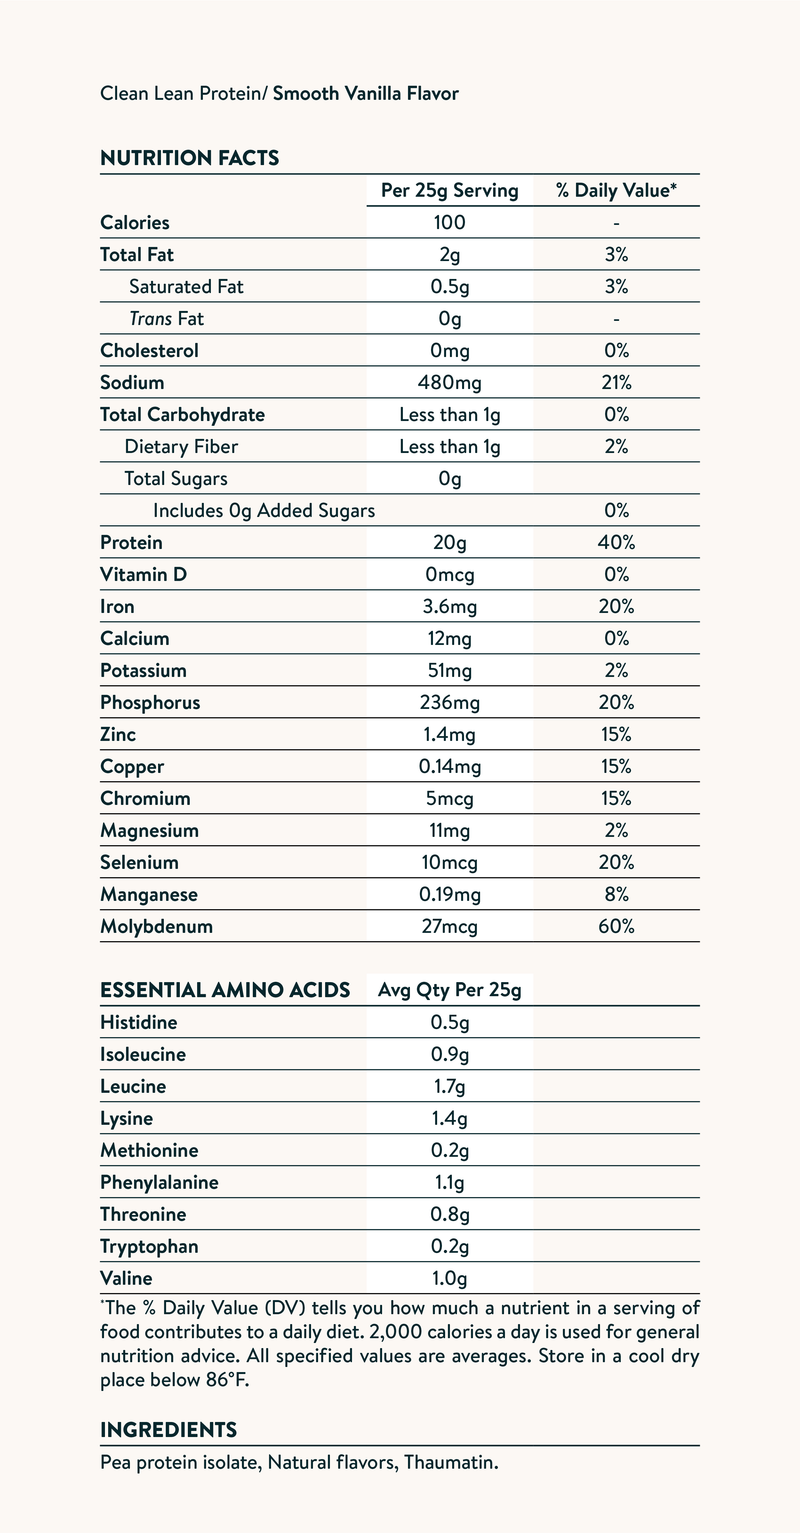 Nutrition facts image